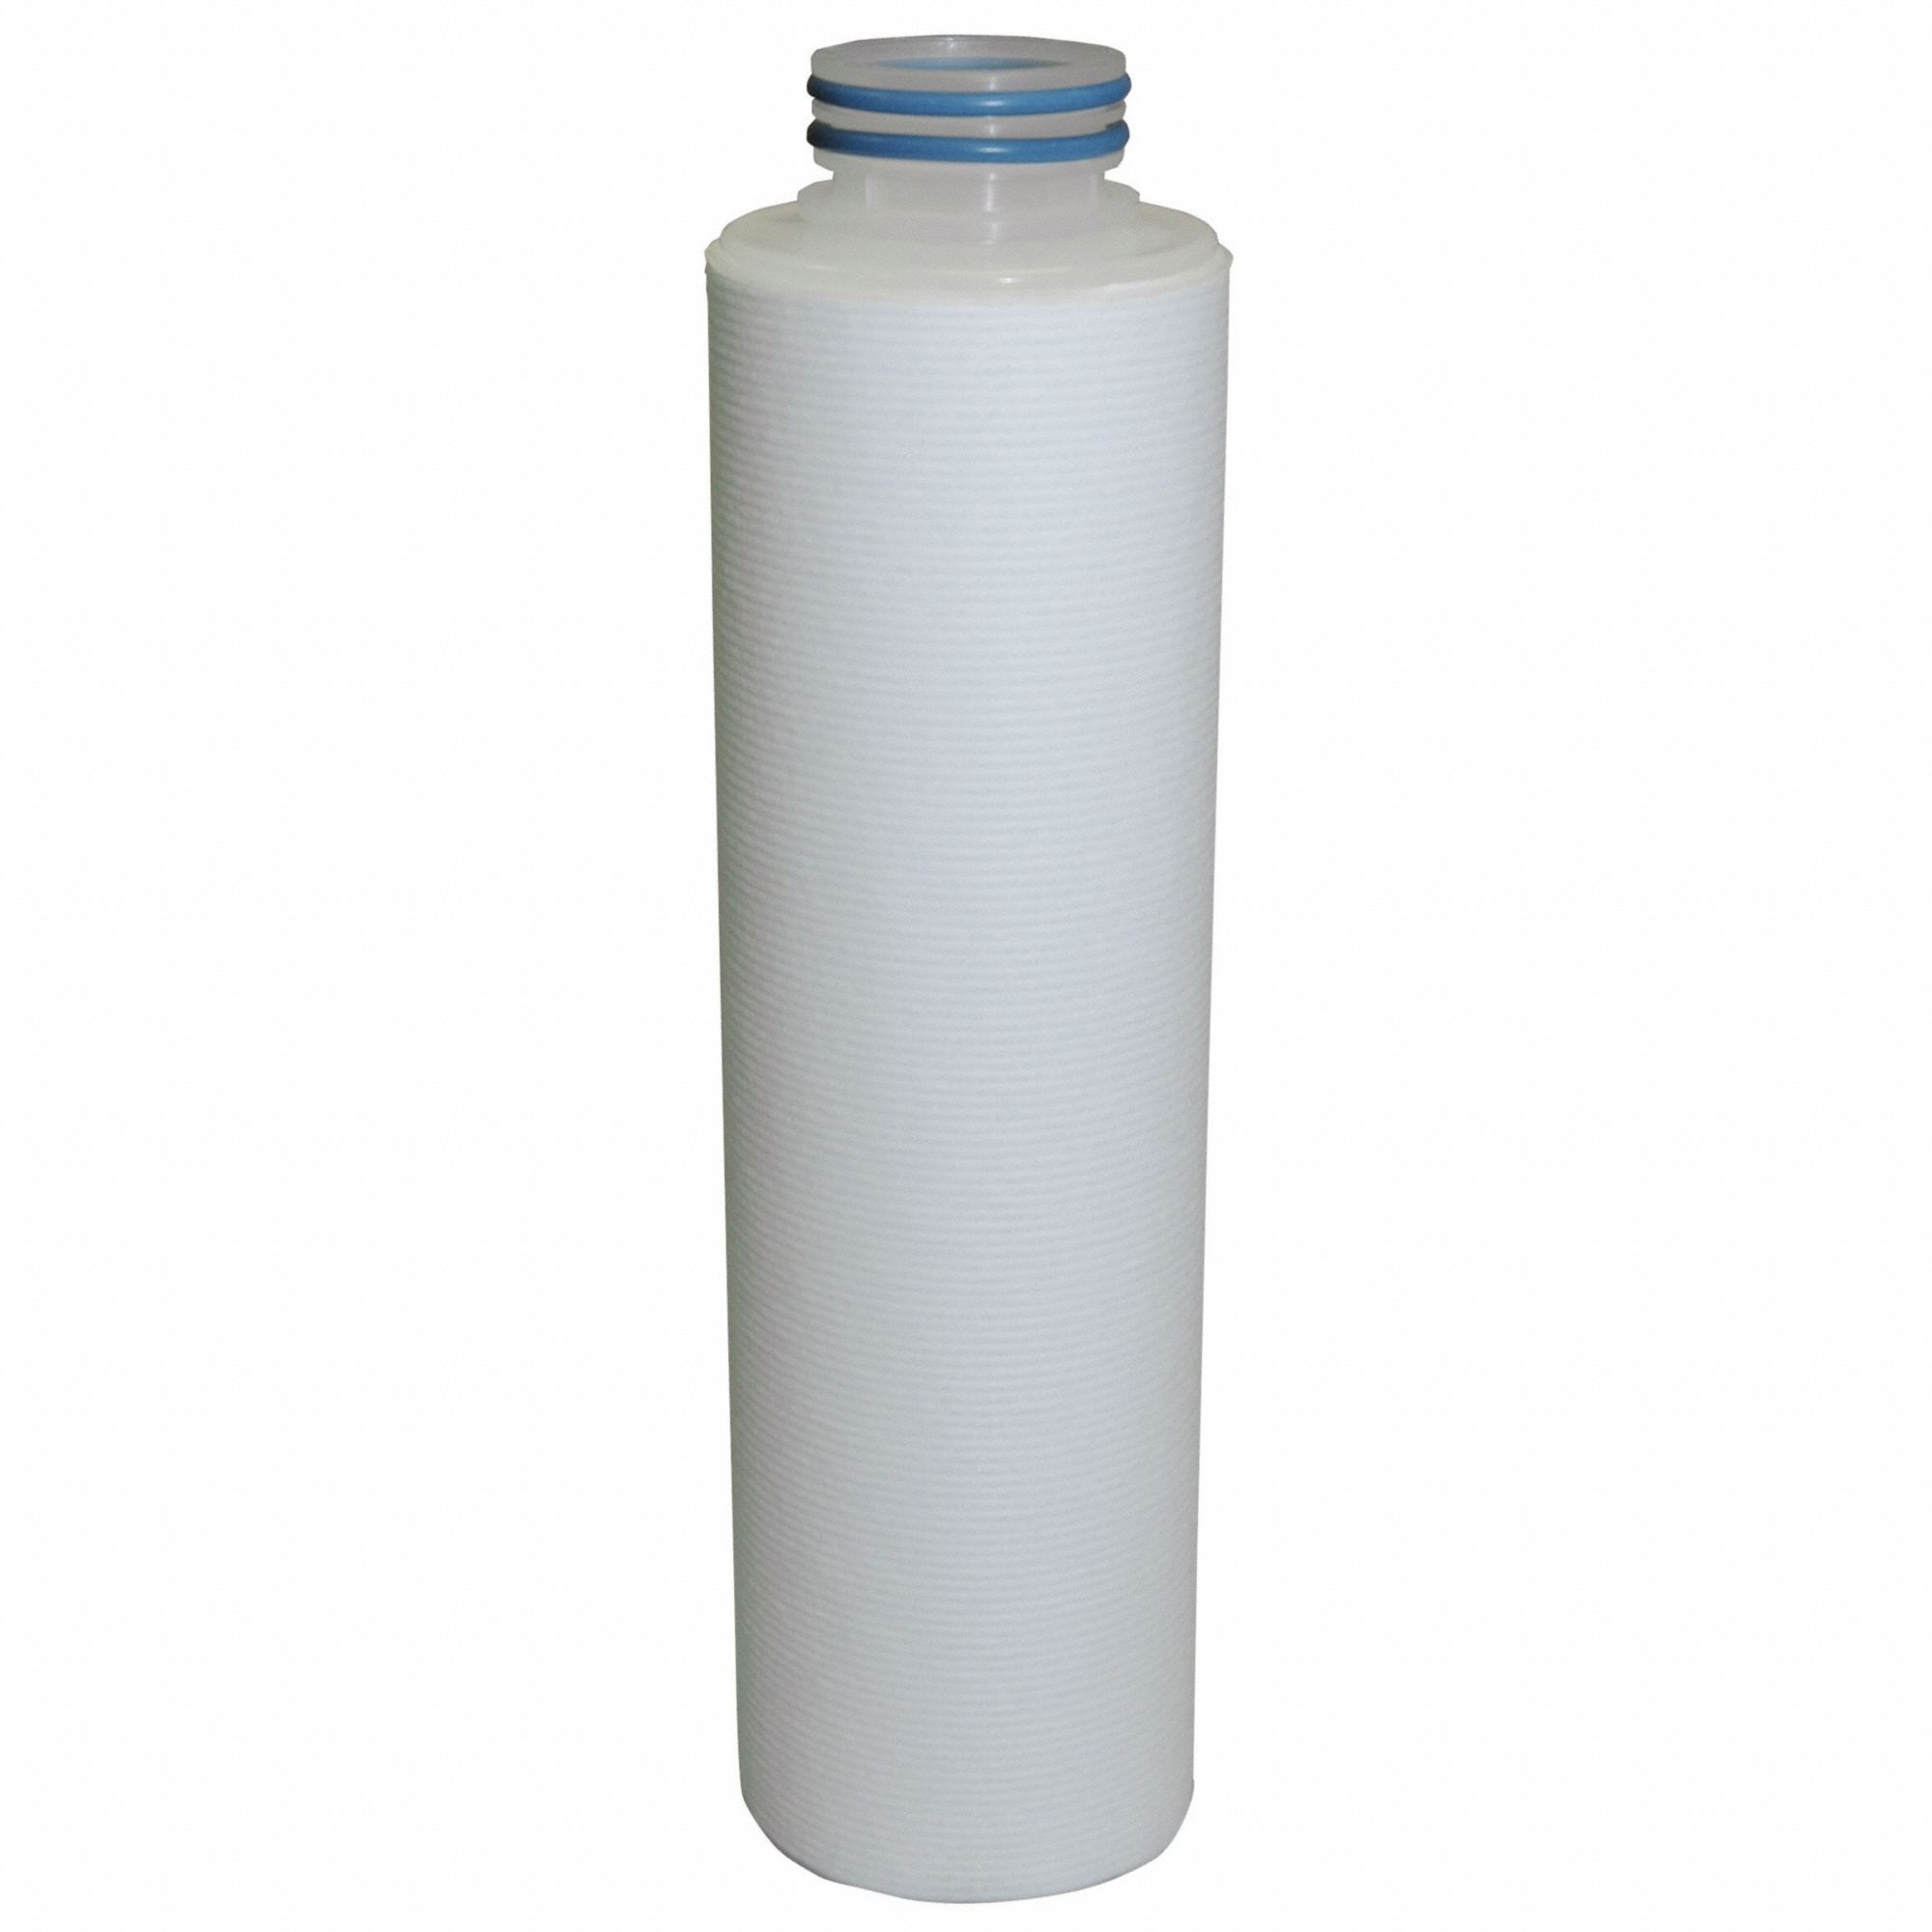 Filter Cartridge: String Wound, 1,000 gpm, 190 micron, 20 in Overall Ht, 176°F Max Temp